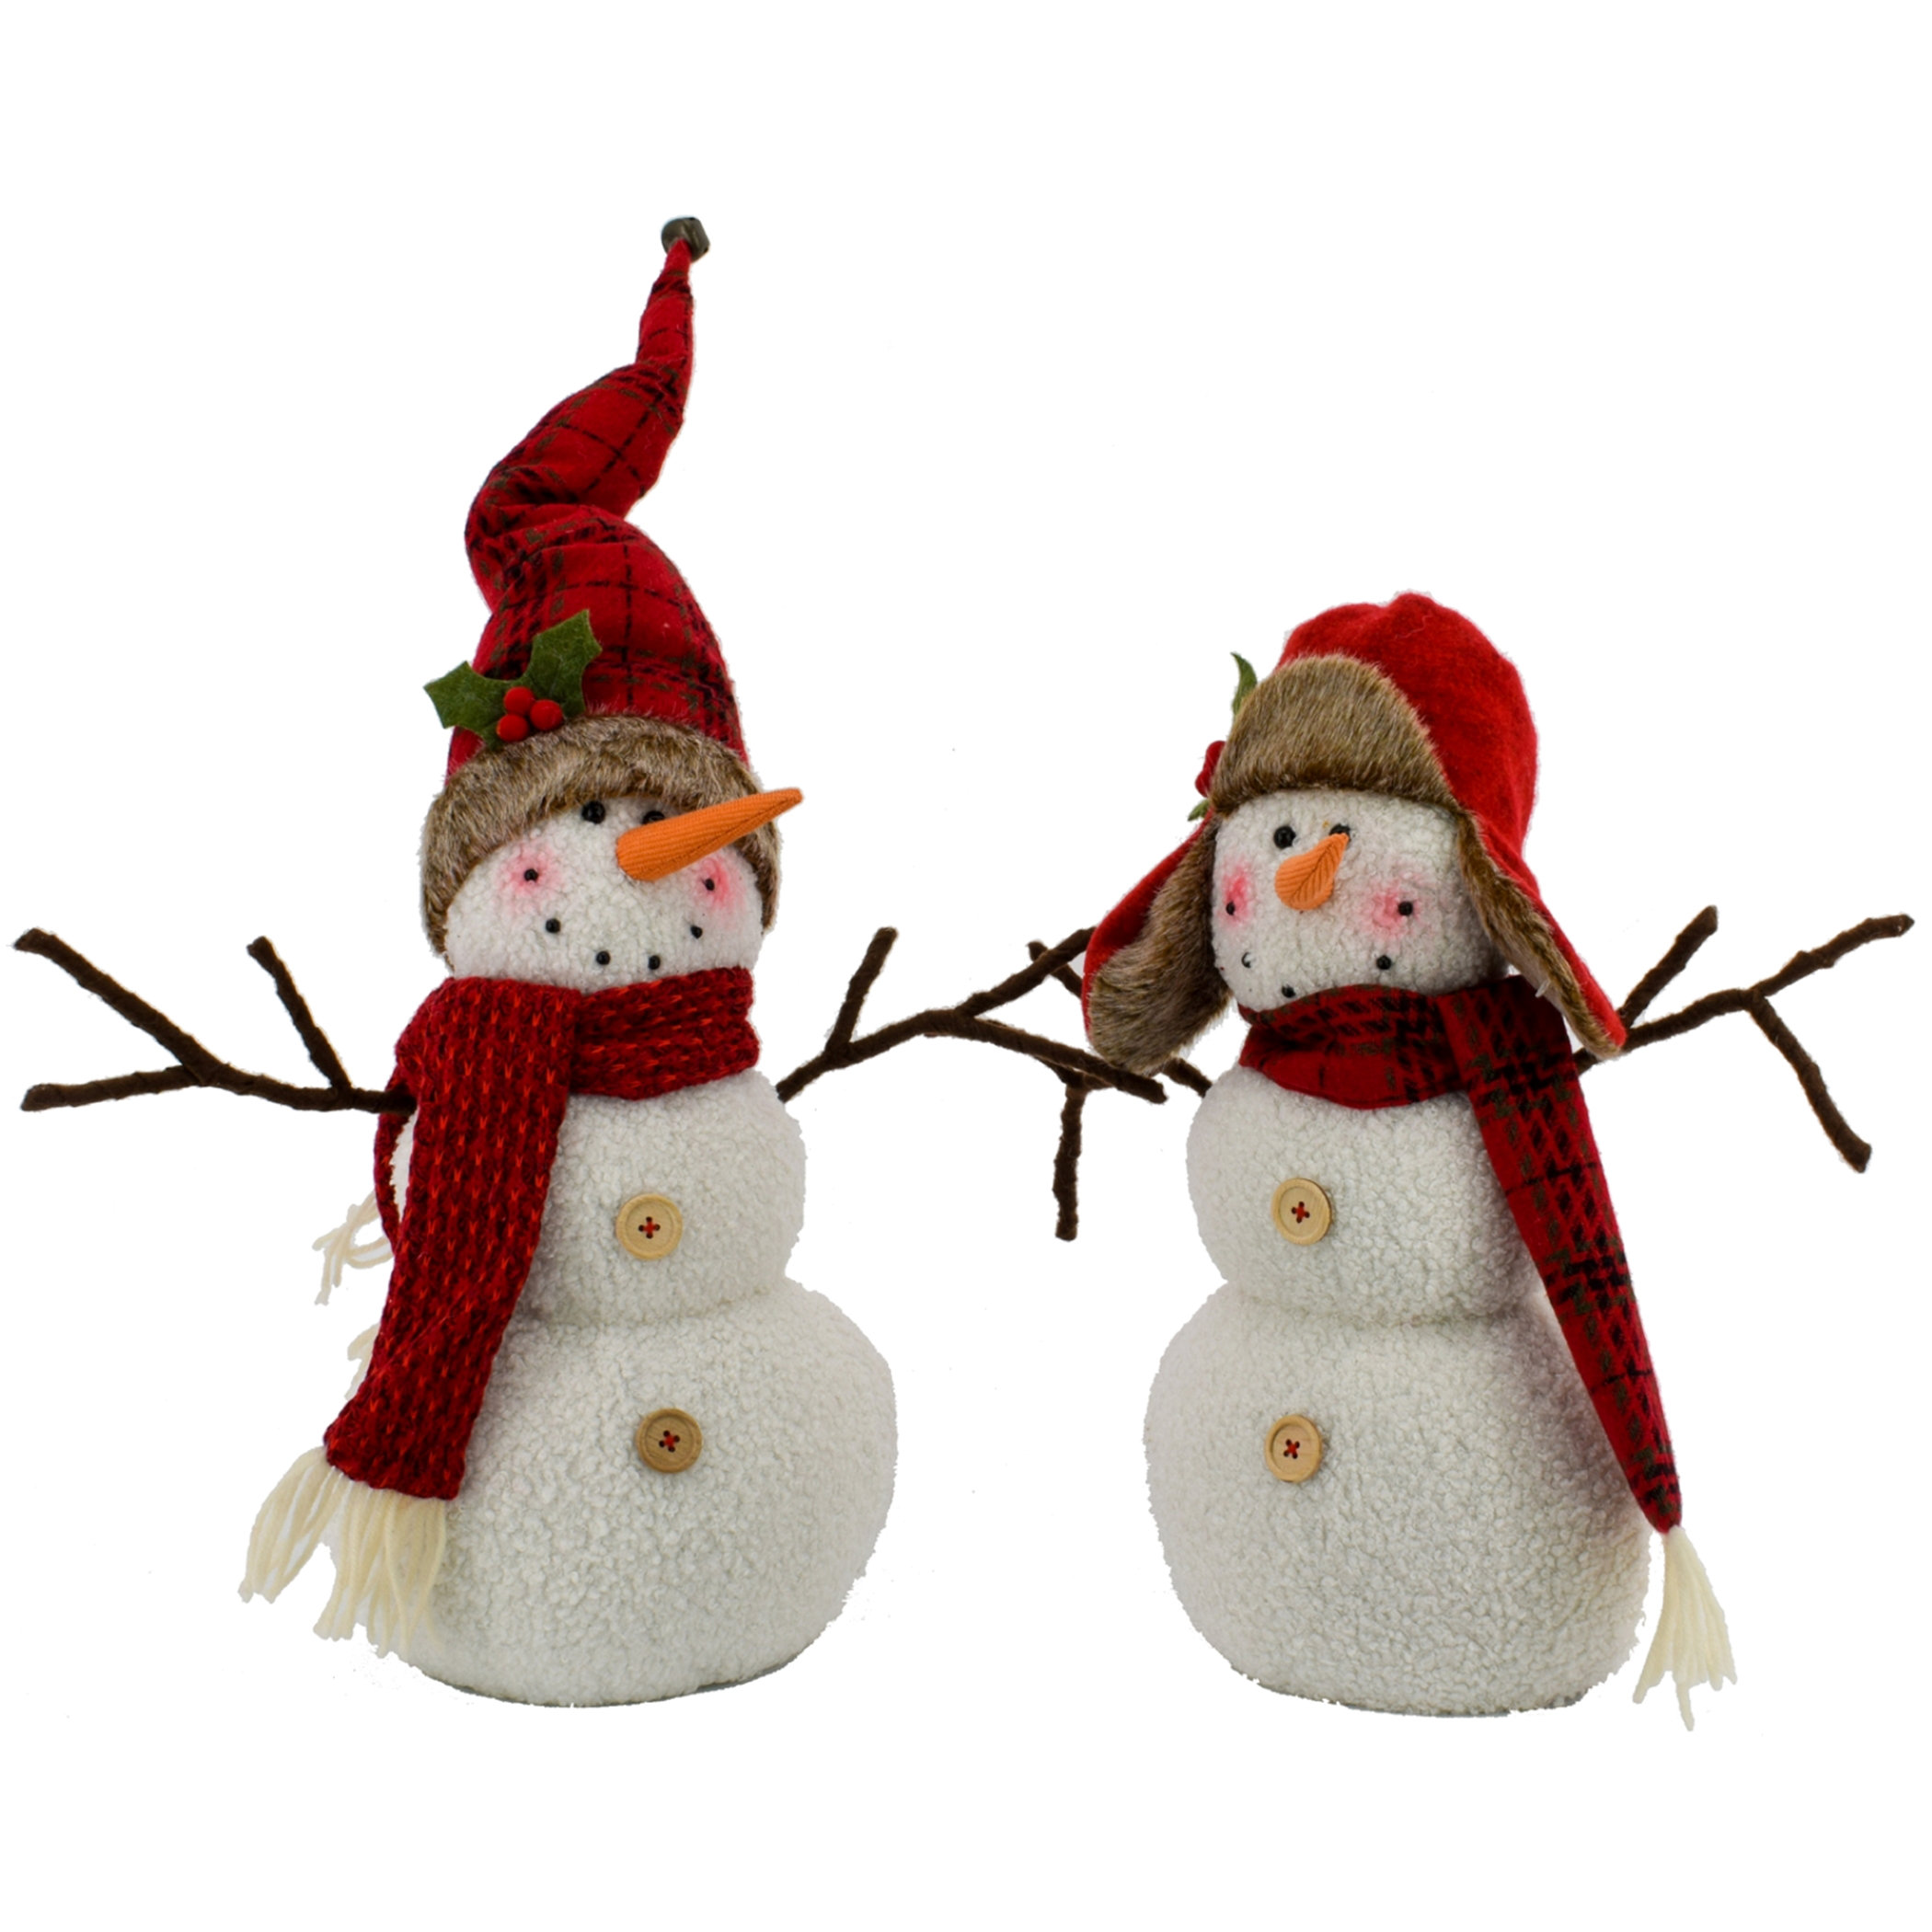 Holiday Hand and Bath Towels Gift Set with Snowman Plush Holder - 4 Pieces